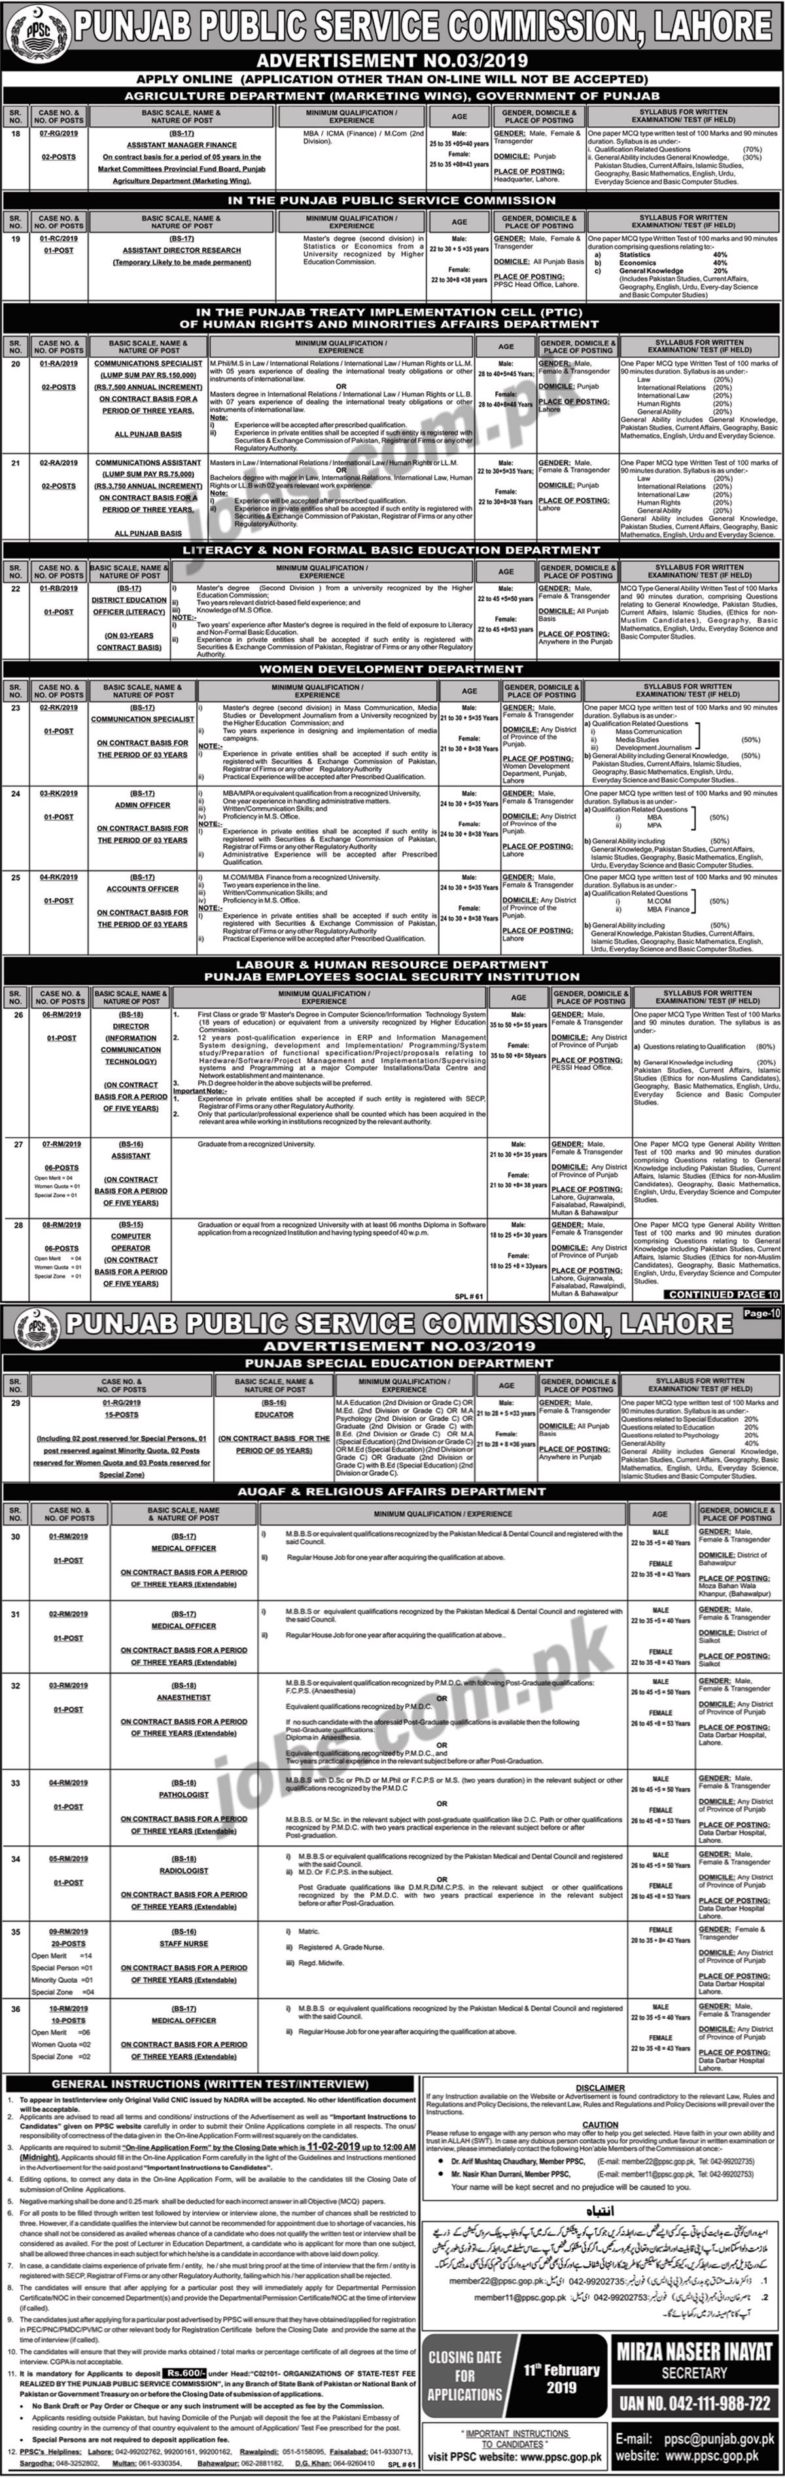 PPSC Jobs (3/2019): 74+ Educators, IT, Admin, Finance & Other Posts in Punjab Government